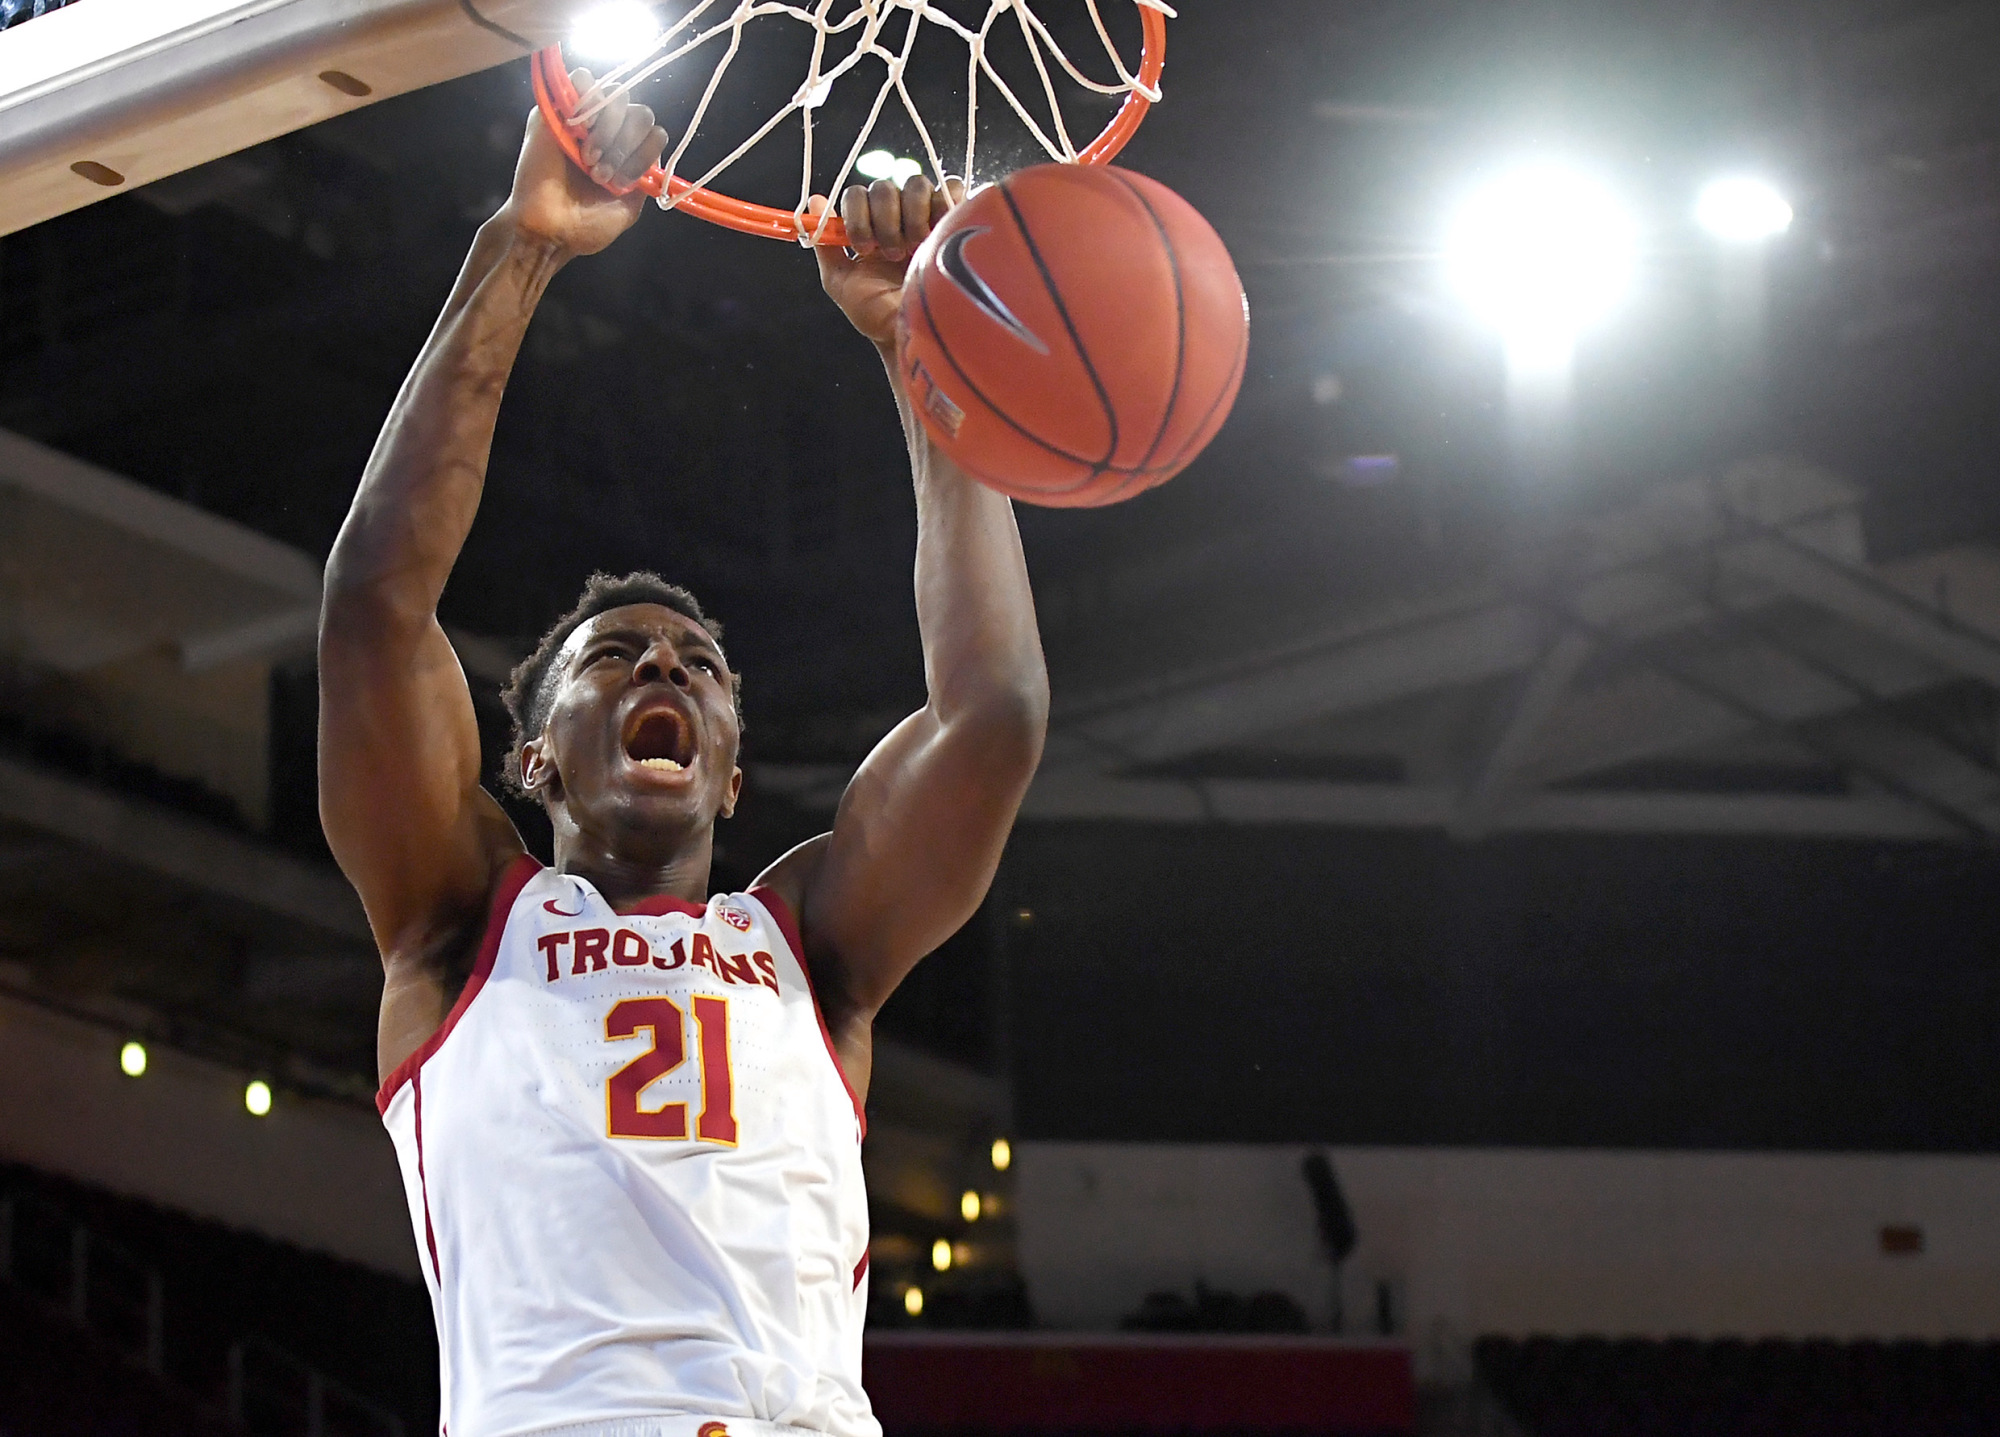 Jan 18, 2020; Los Angeles, California, USA; USC Trojans forward Onyeka Okongwu (21) dunks the ball in the first half of the game against the Stanford Cardinal at Galen Center.